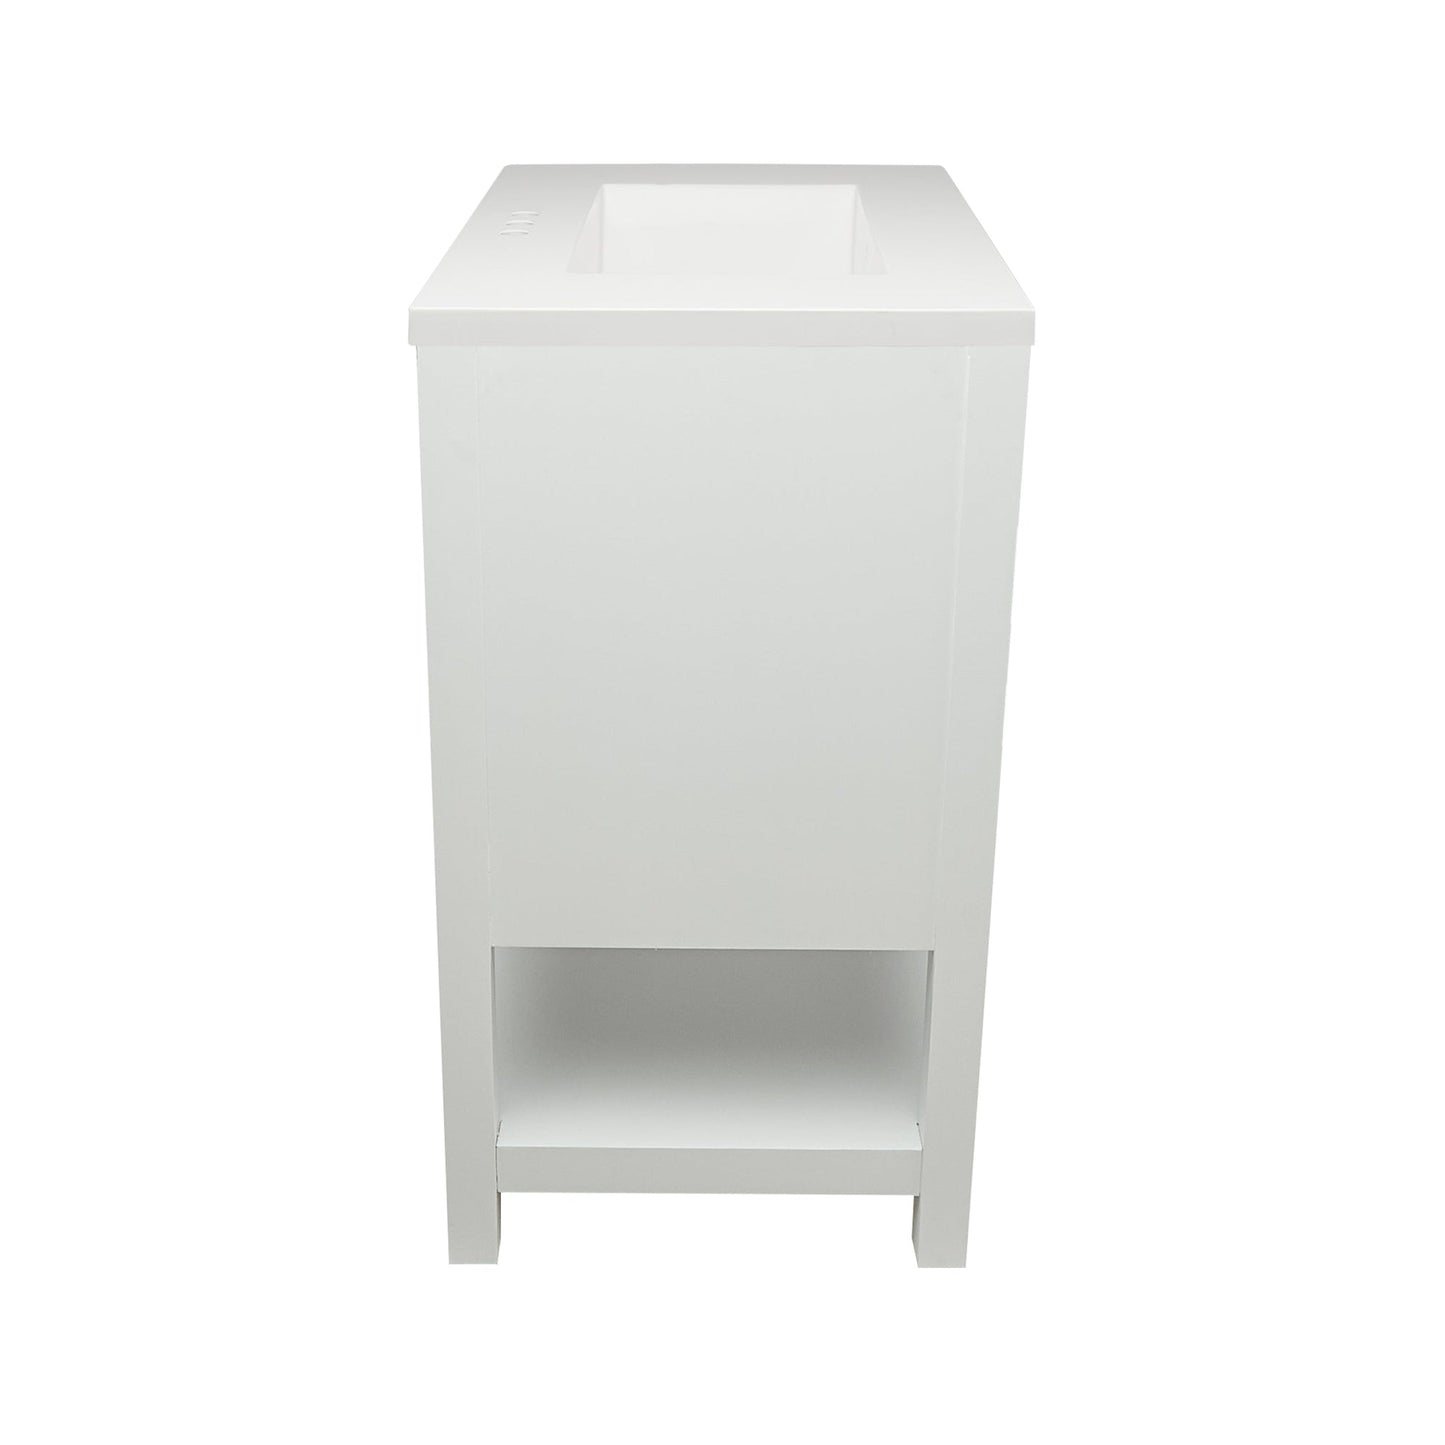 Ella's Bubbles Taos 25" White Bathroom Vanity With White Cultured Marble Top and Sink